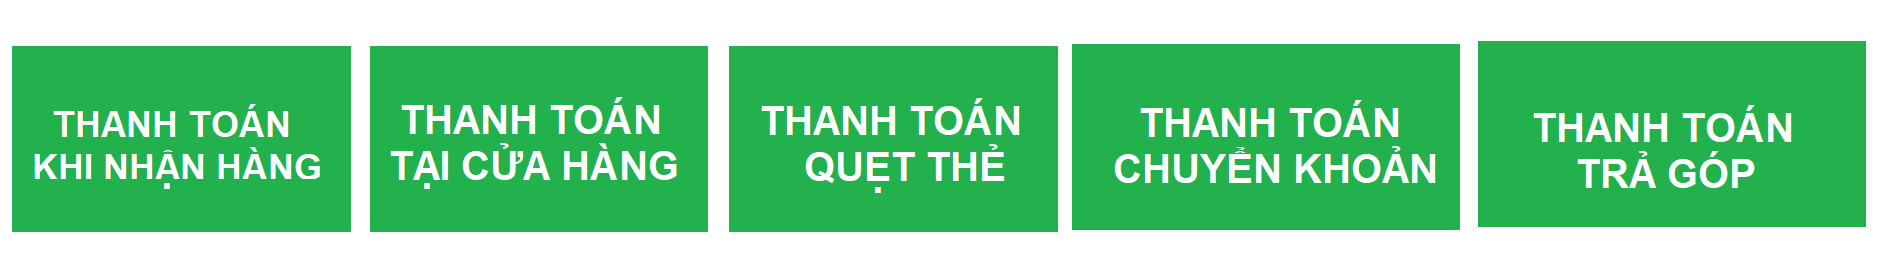 thanh-toan-1638936087.png